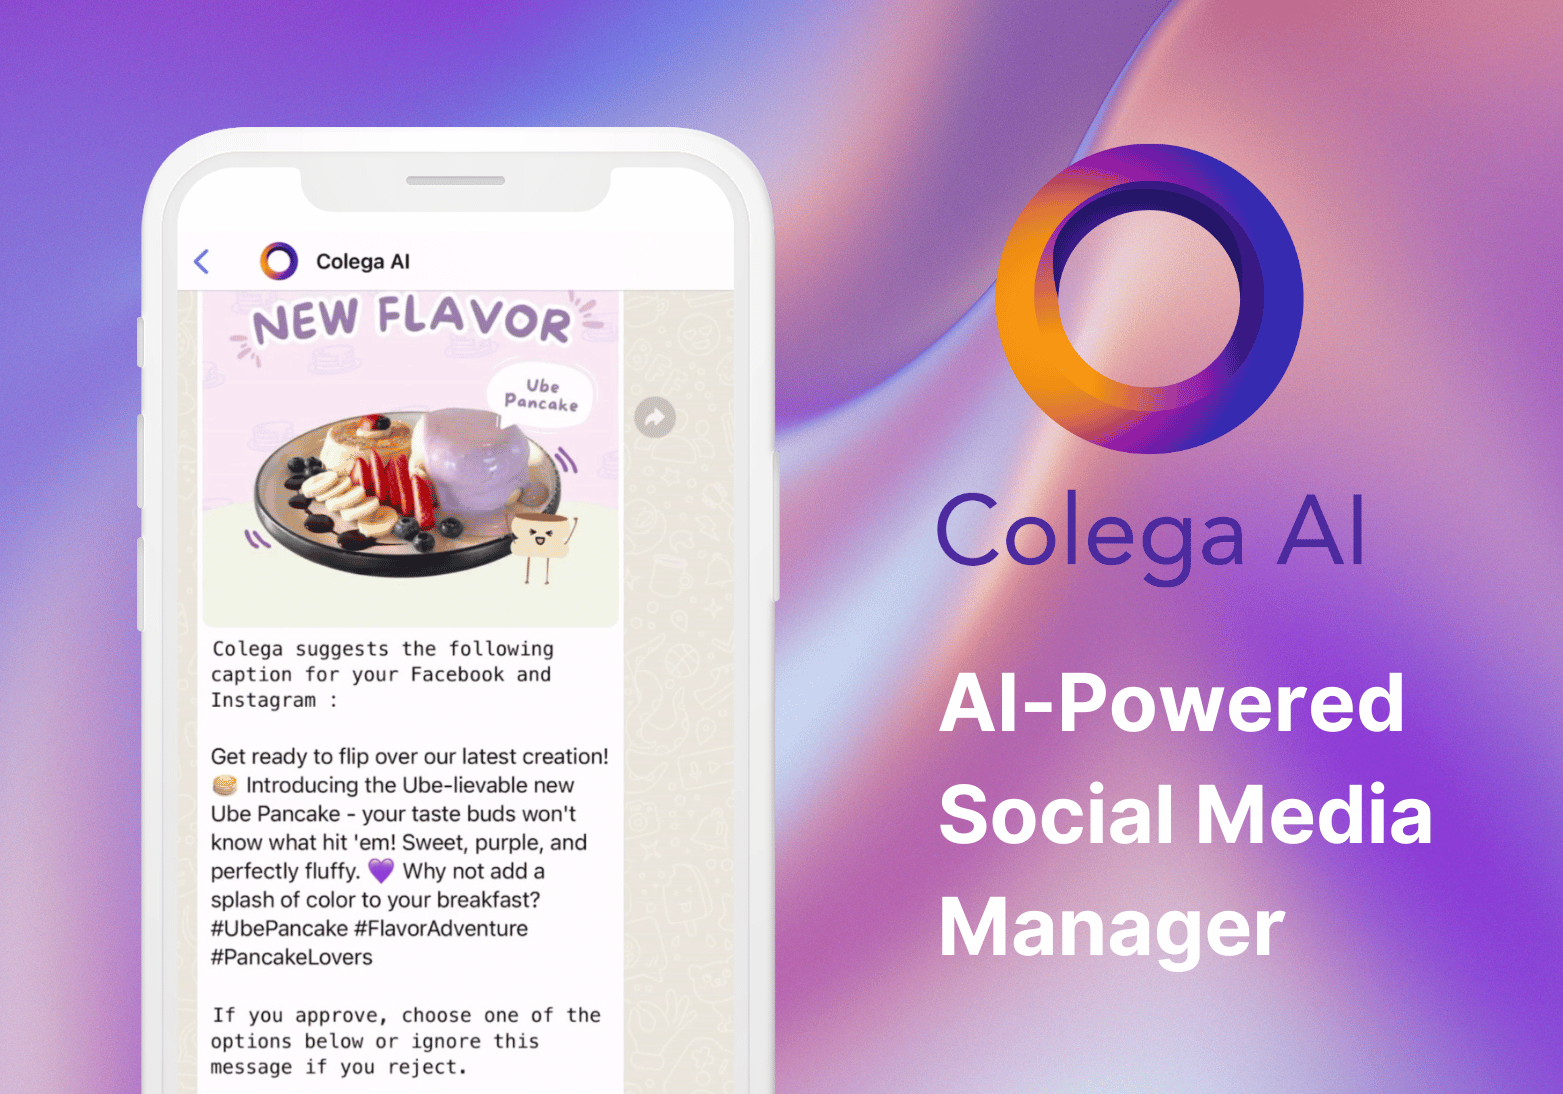 Colega AI Blog - Thoughts on Social Media for F&B and Retail